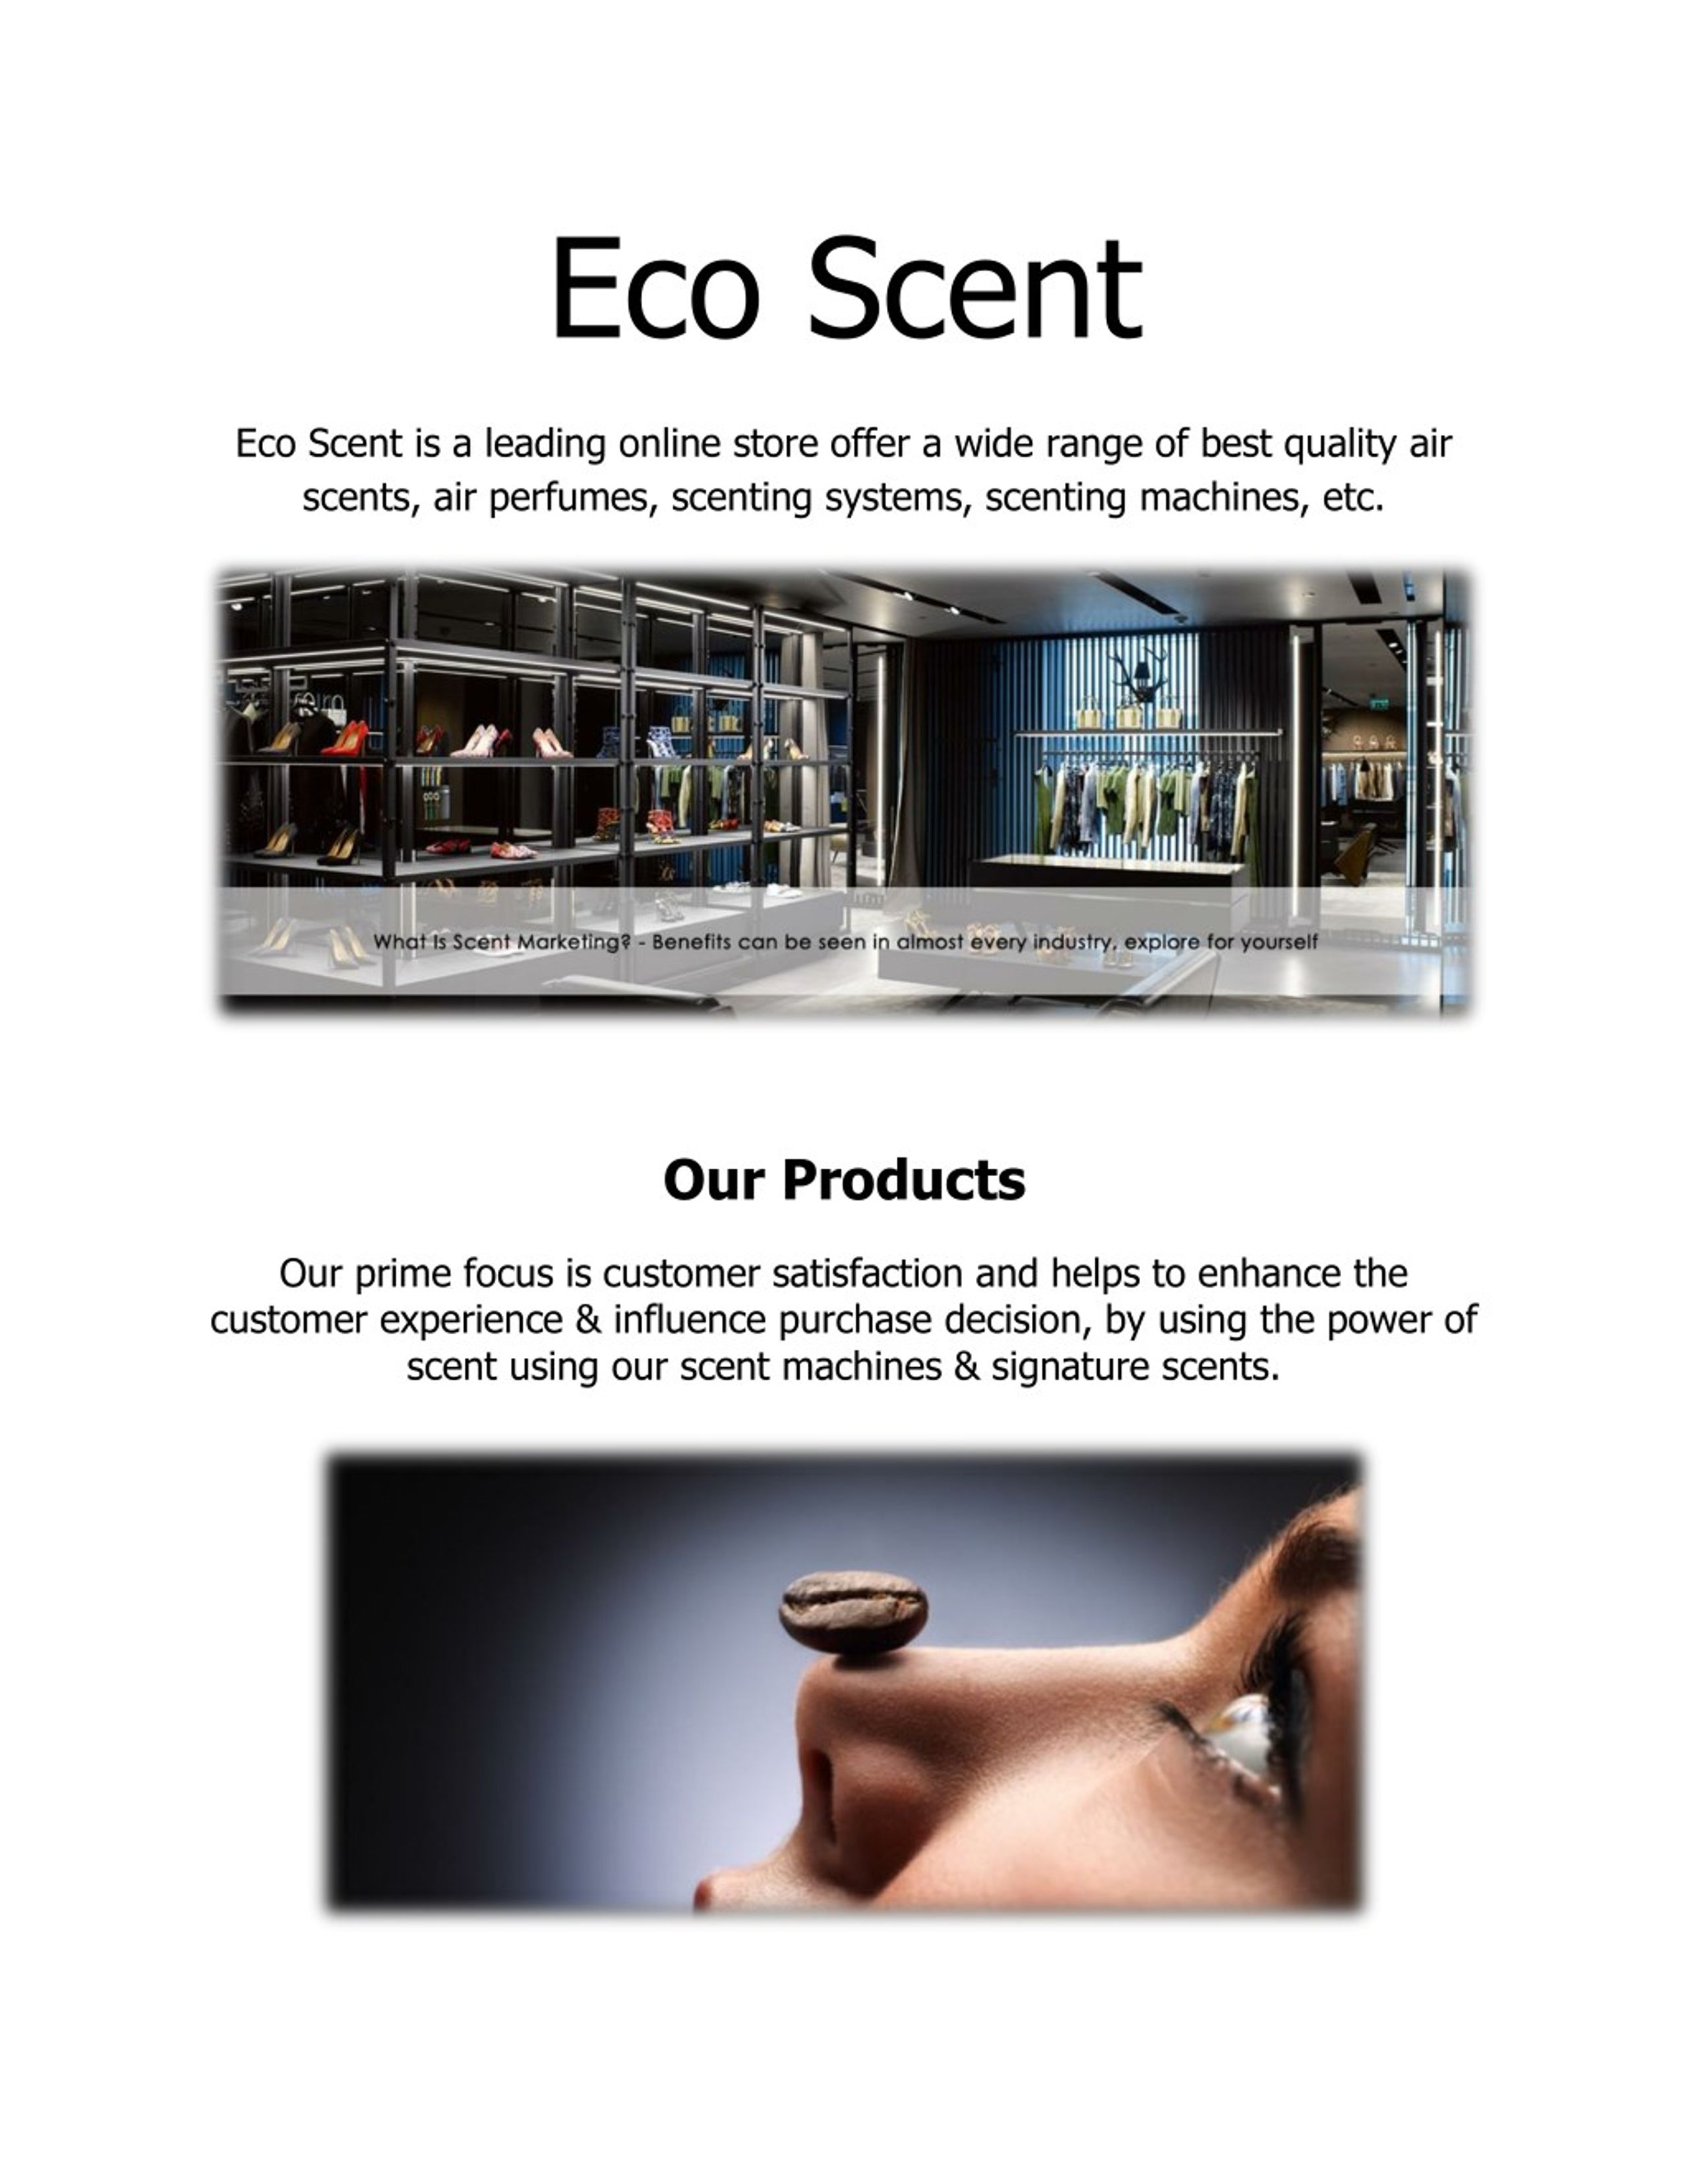 What is Scent Marketing?